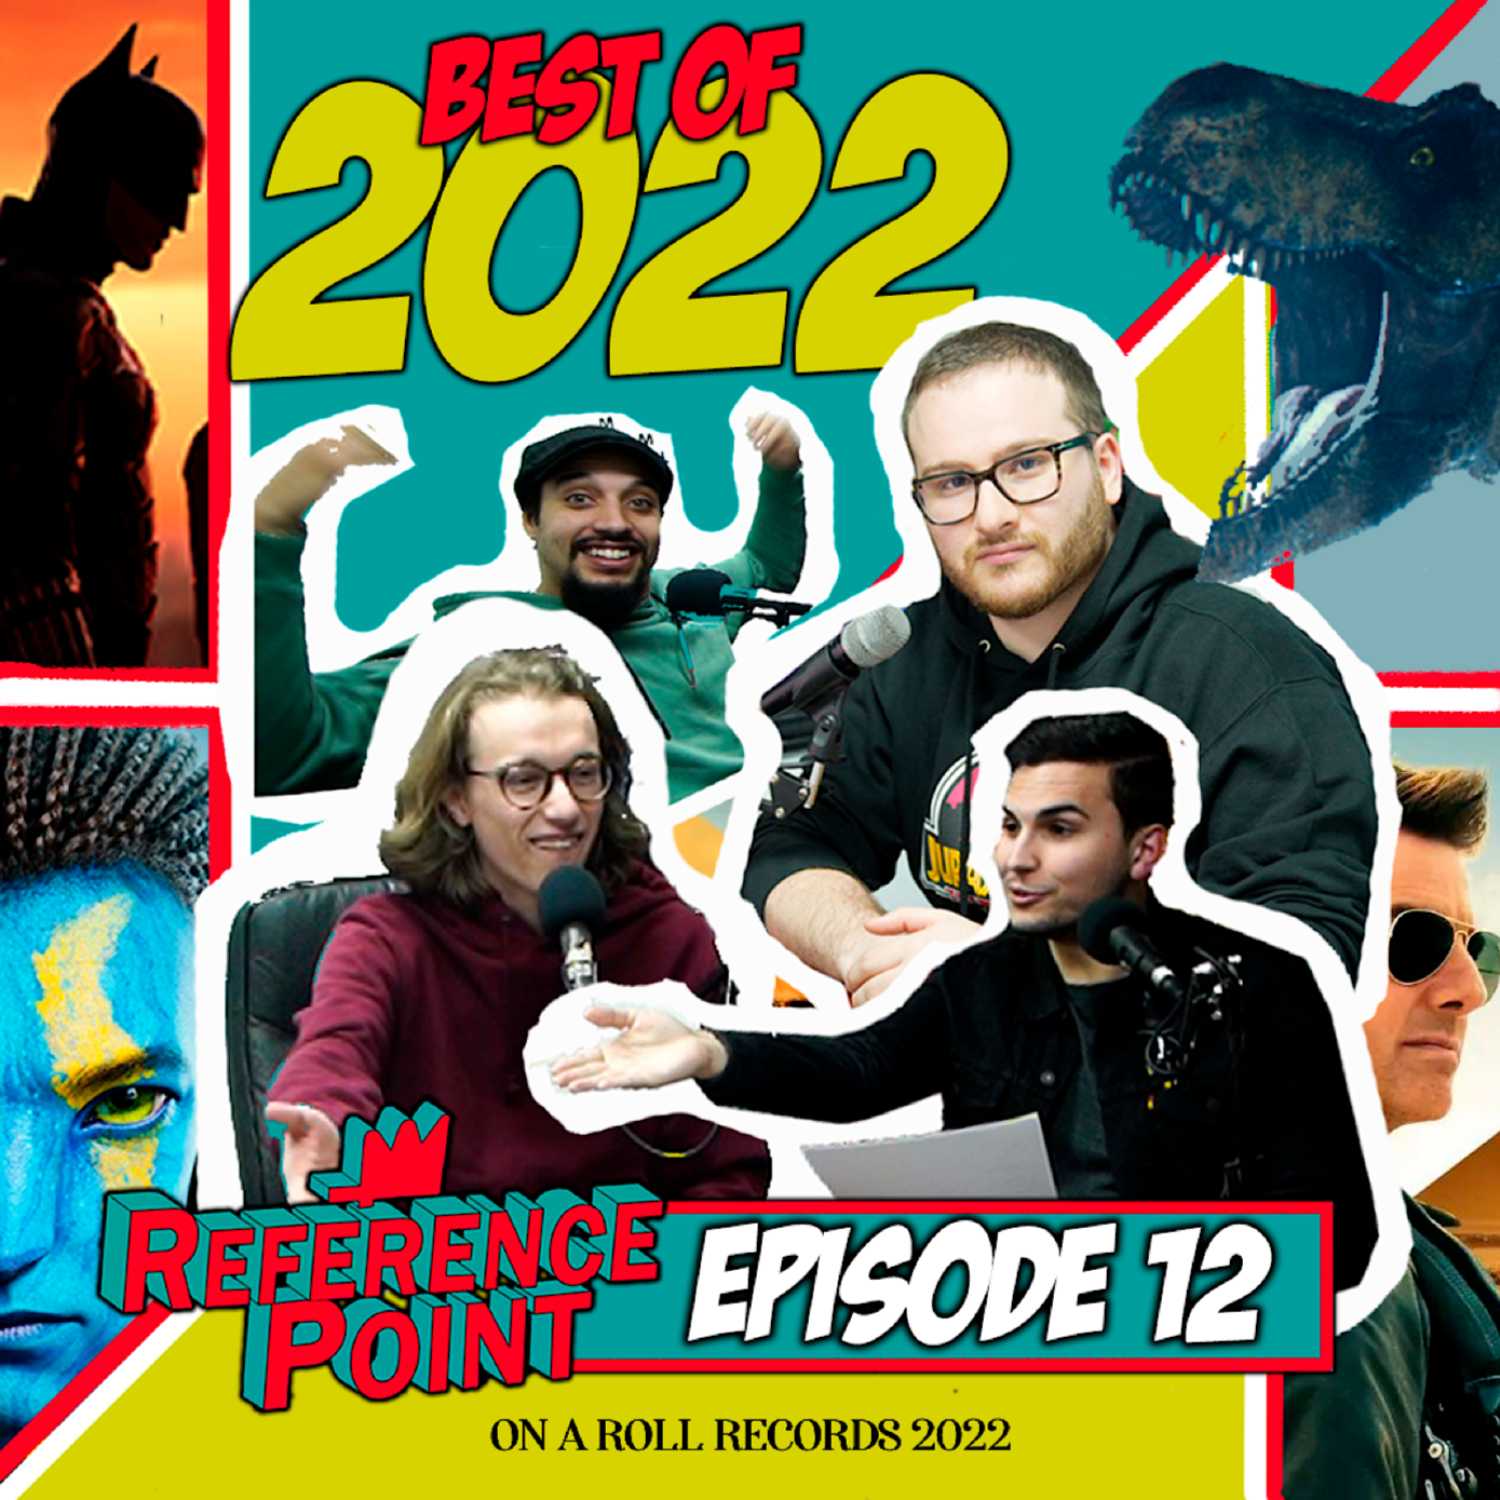 REFERENCE POINT - Episode 12 - THE BEST MOVIES OF 2022